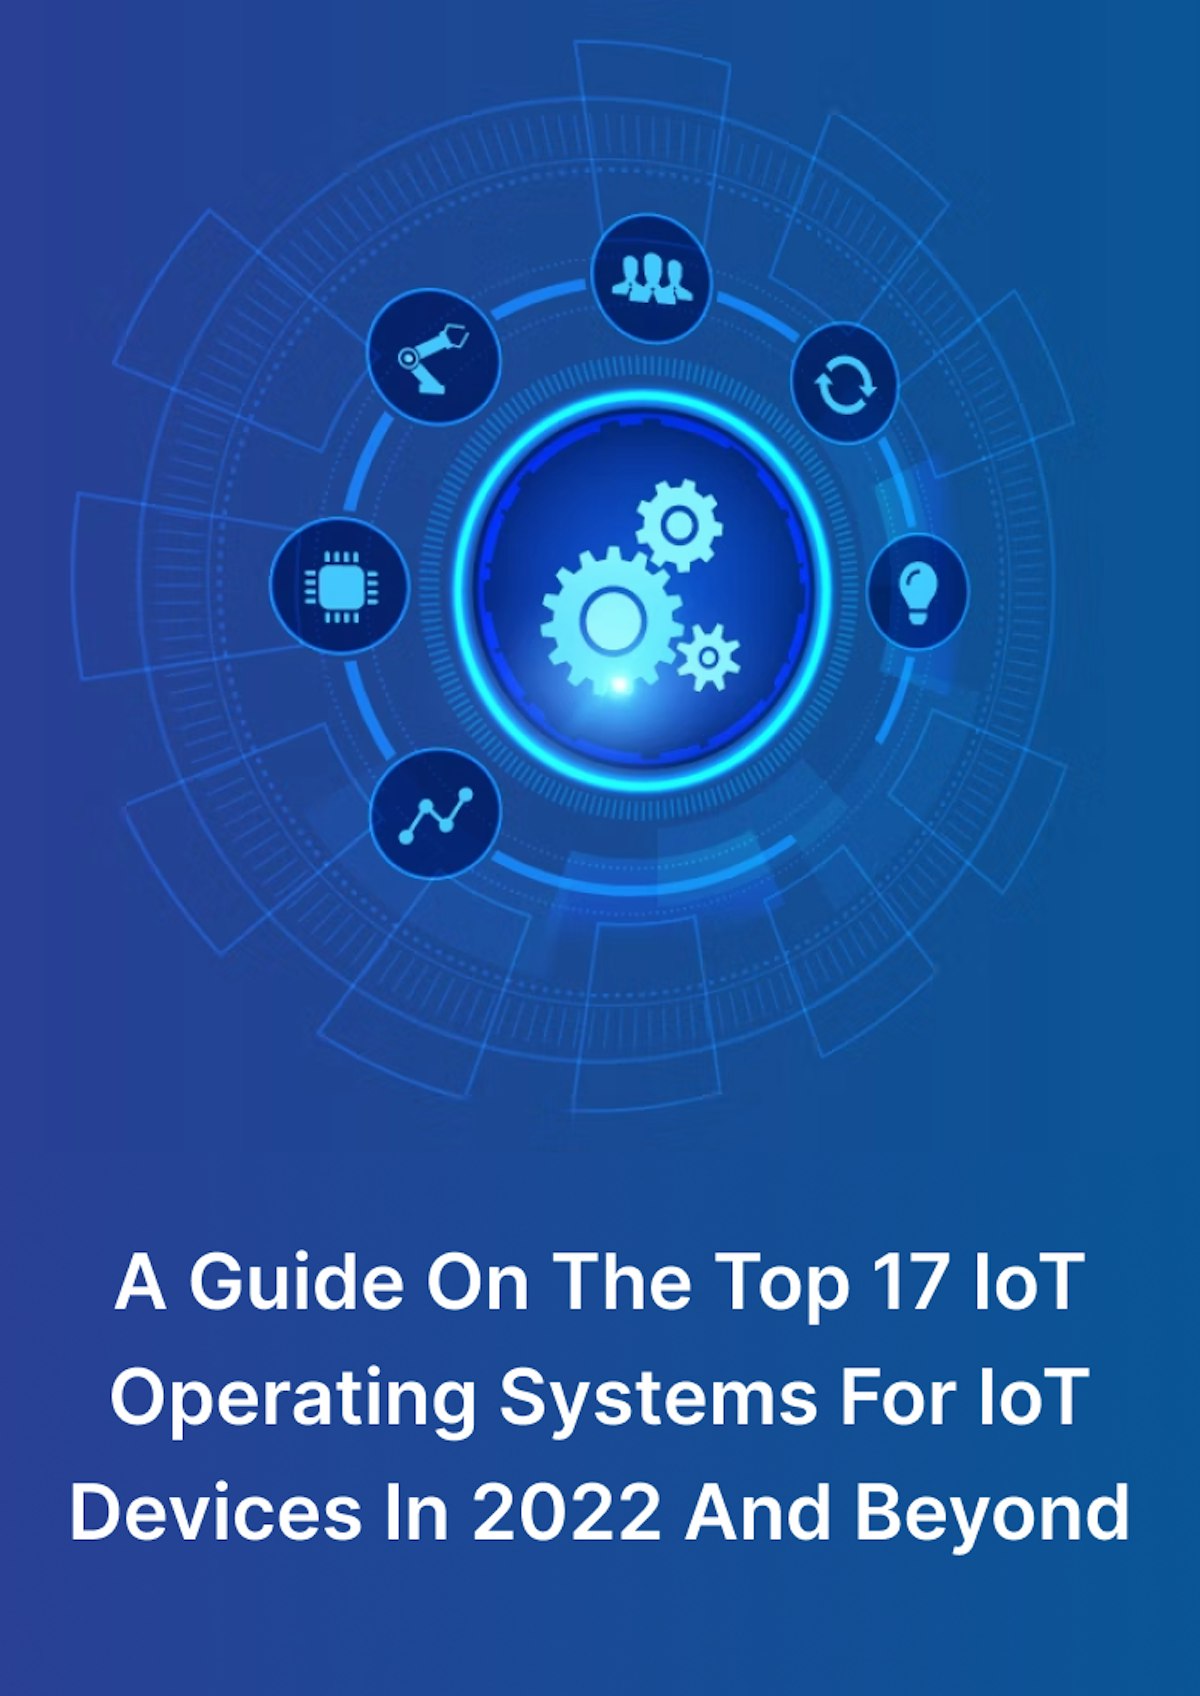 IoT Devices - Guide 